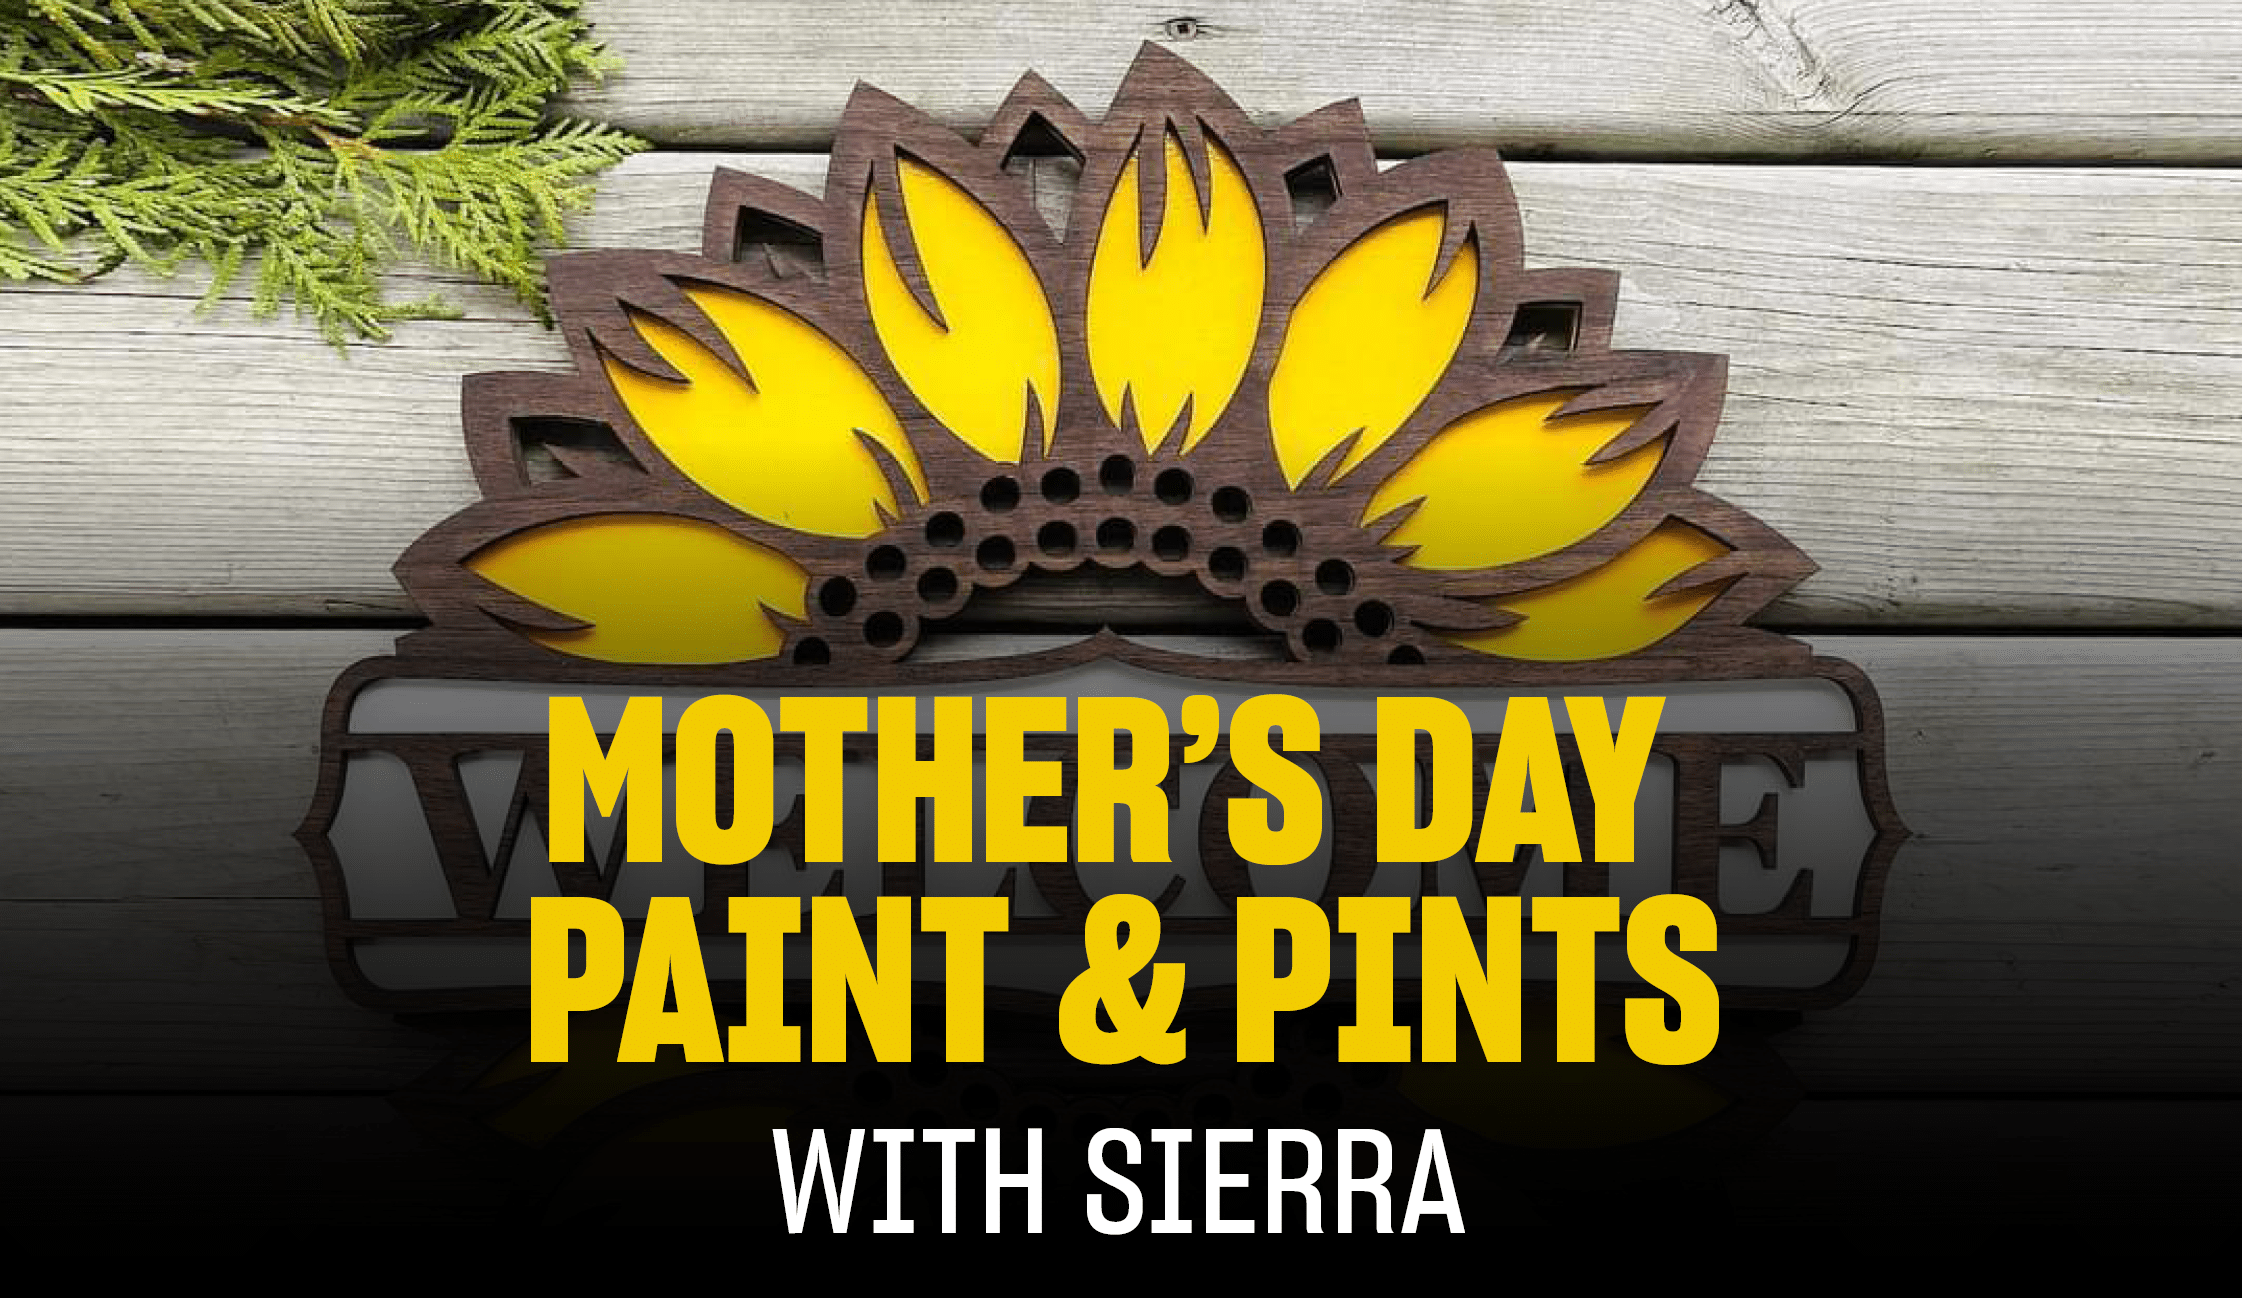 Mother's Day Paint & Pints